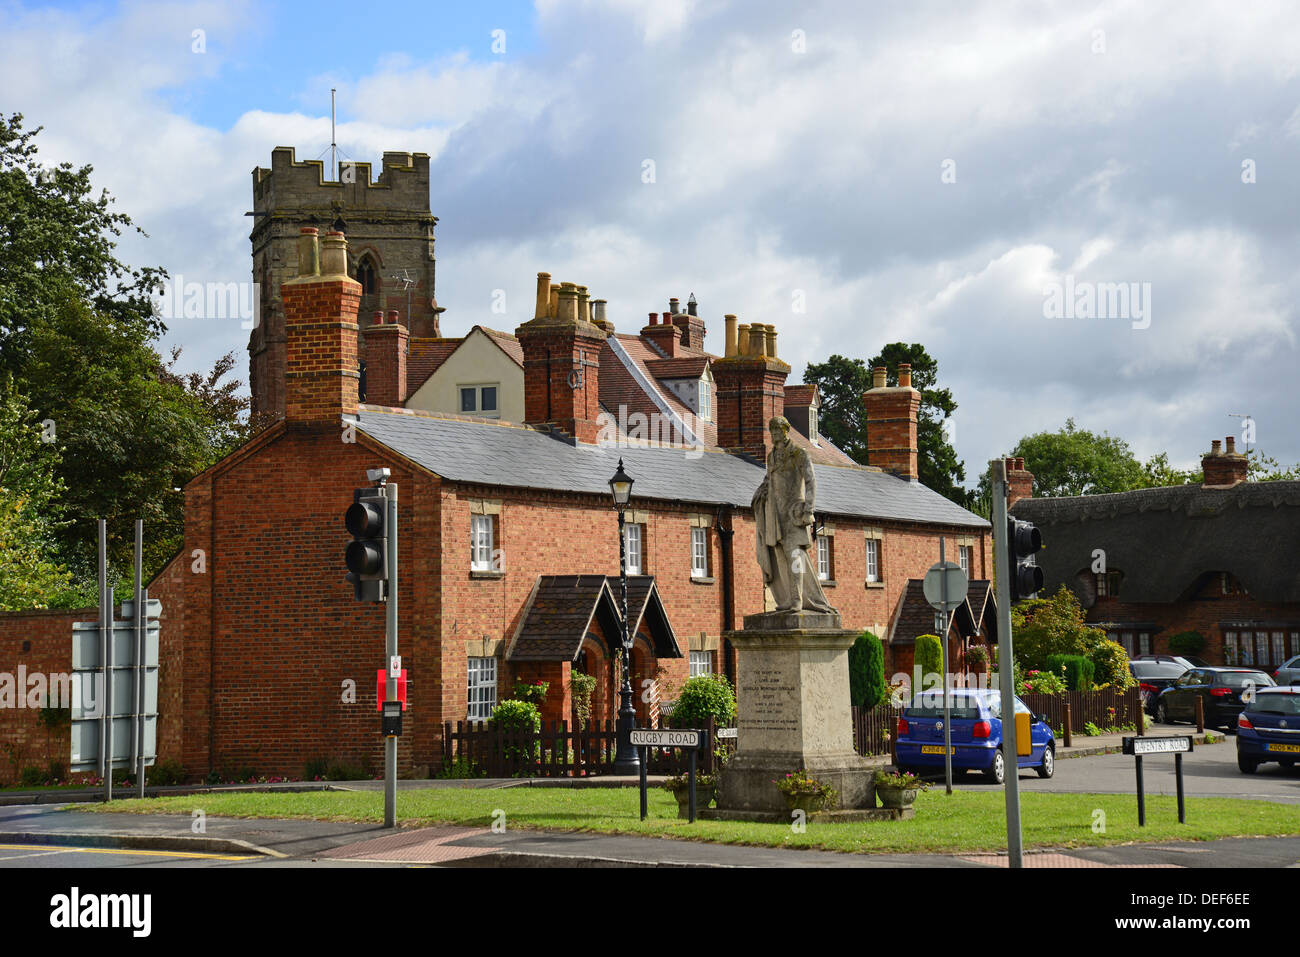 The Square showing St Peter's Church and statue of Lord Montague Scott, Dunchurch, Warwickshire, England, United Kingdom Stock Photo